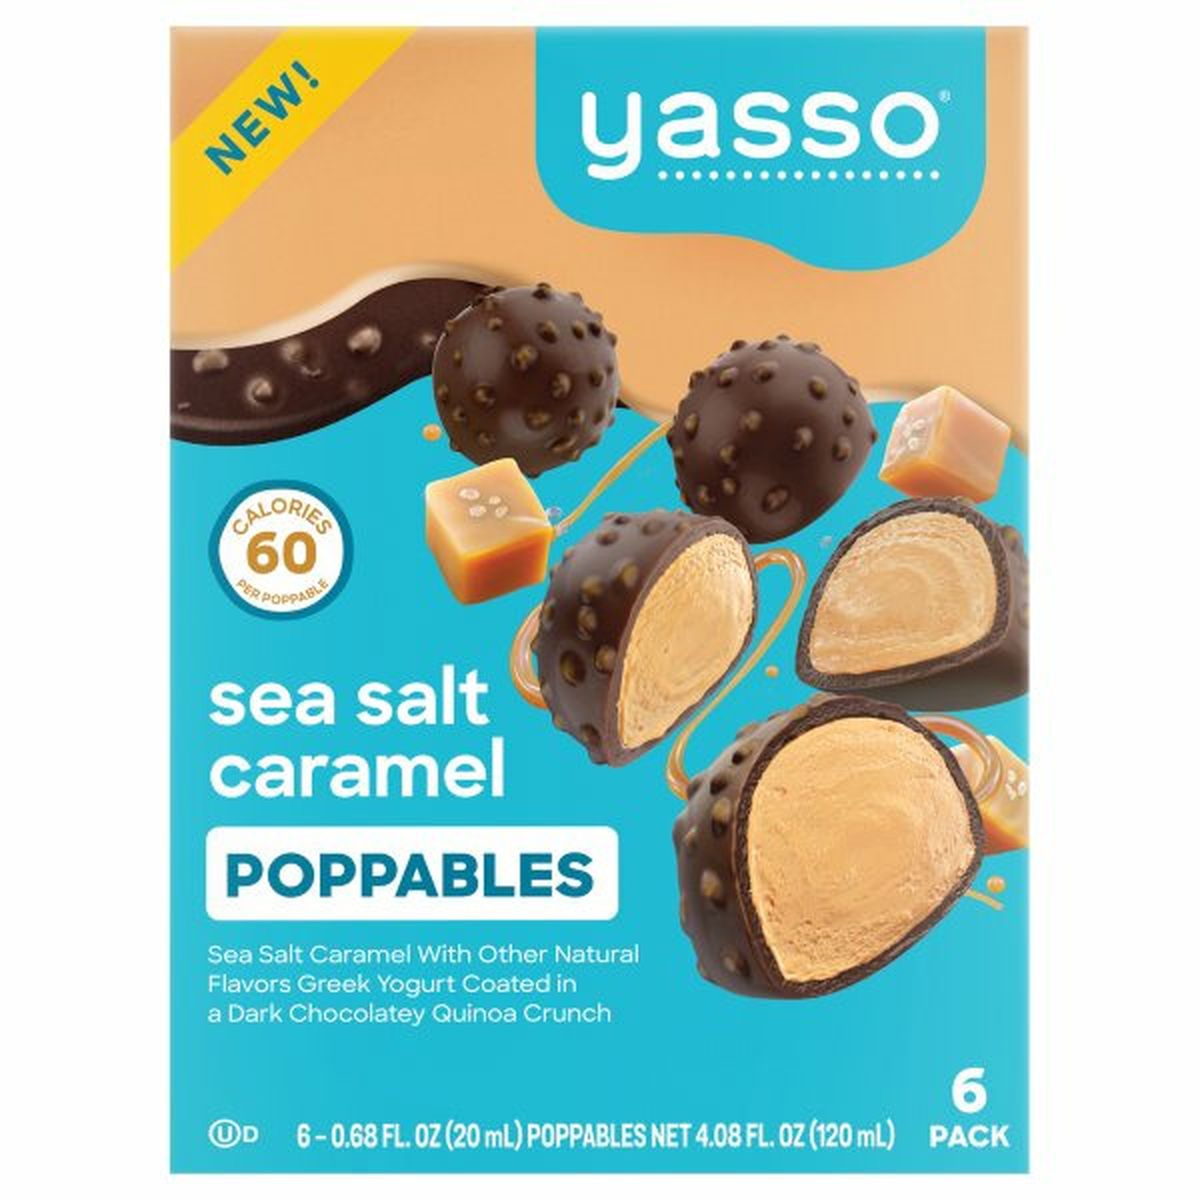 Calories in Yasso Poppables, Sea Salt Caramel, 6 Pack